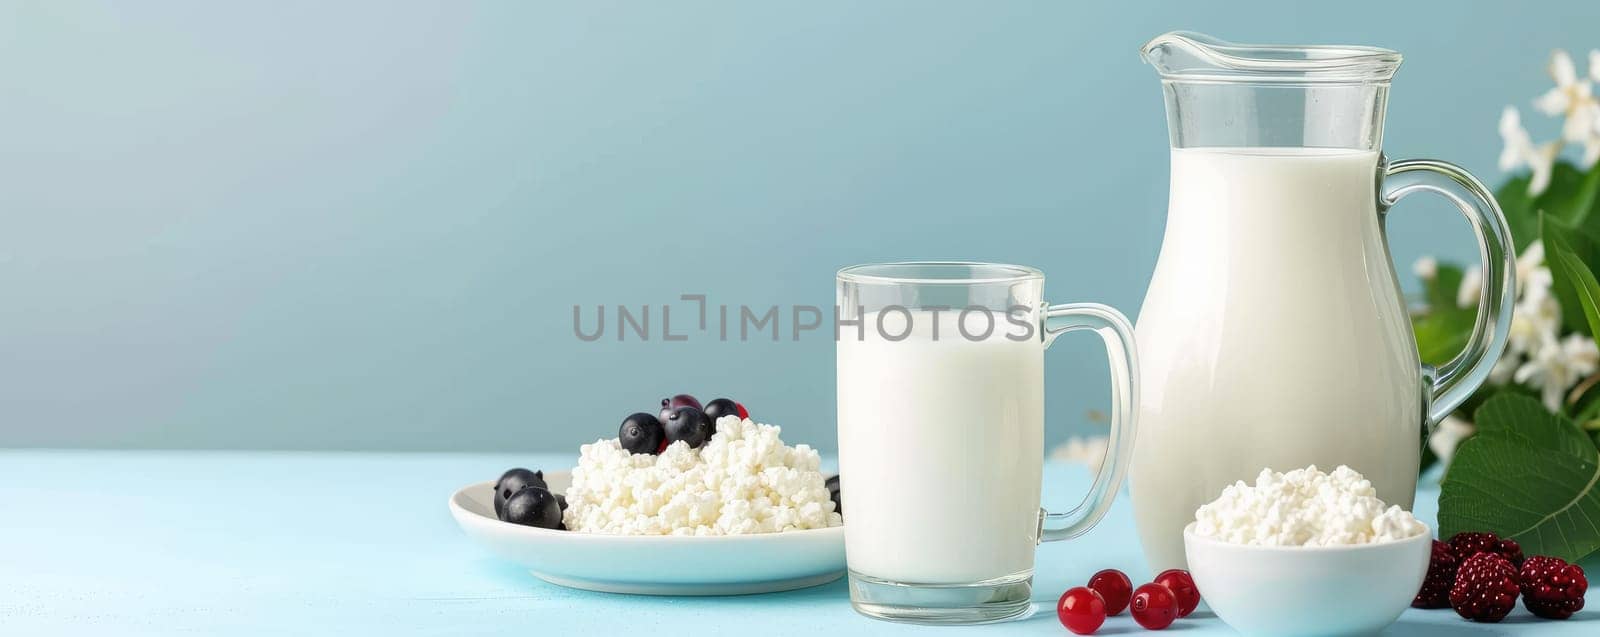 Morning breakfast with jug of milk, cottage cheese and berries on blue background by Yurich32